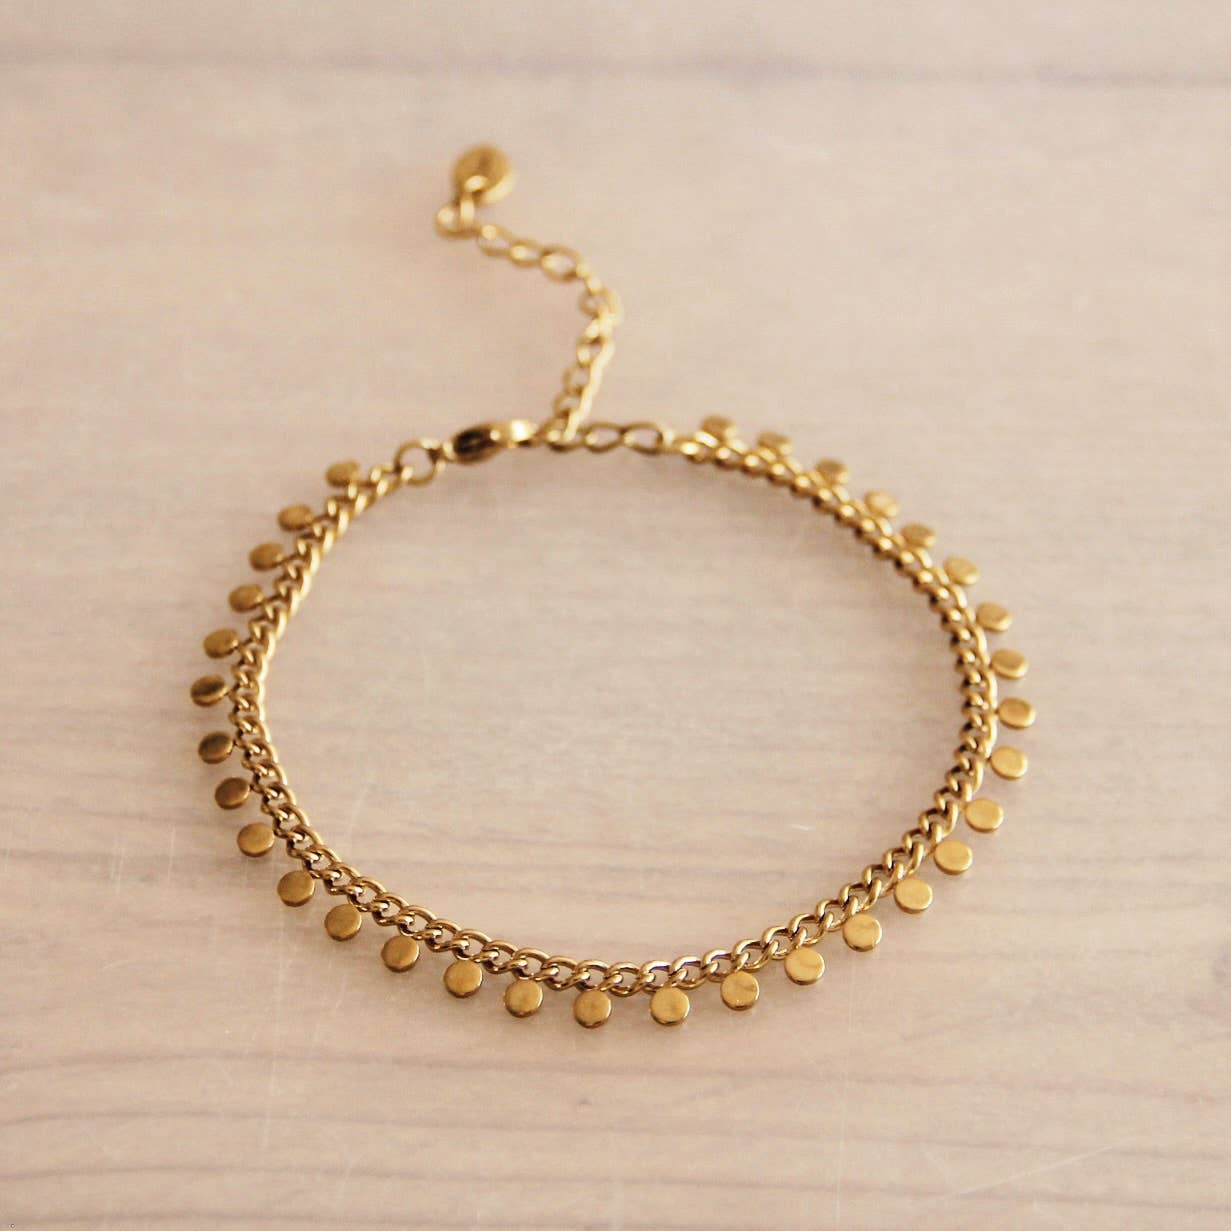 Steel chain bracelet with coins - gold